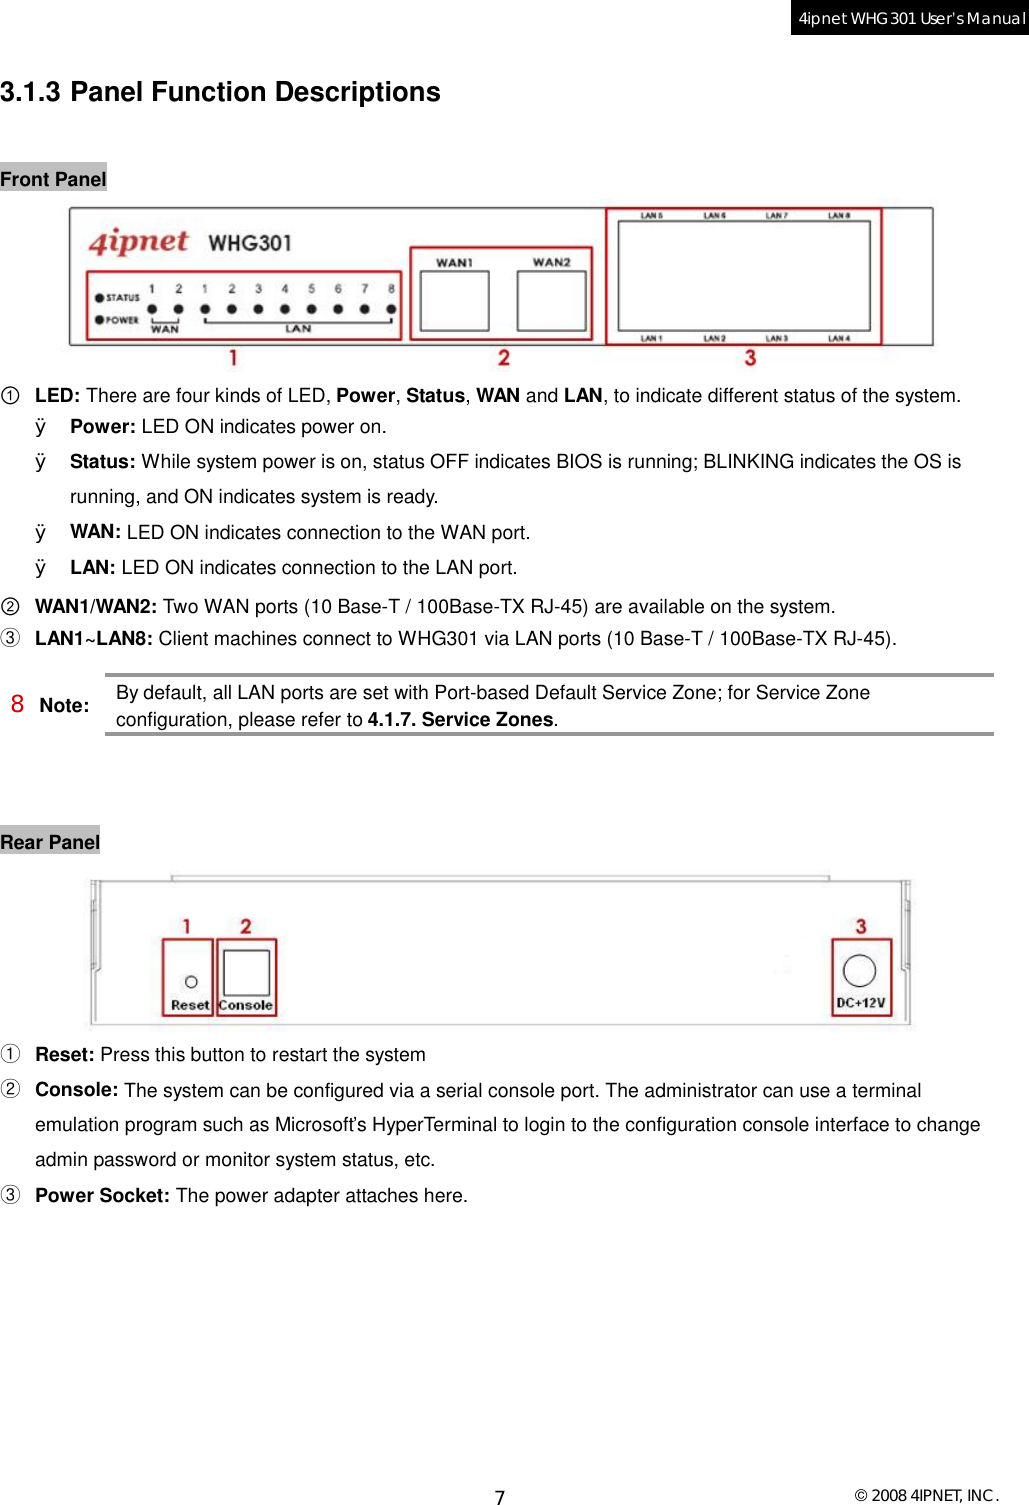  © 2008 4IPNET, INC. 7 4ipnet WHG301 User’s Manual  3.1.3 Panel Function Descriptions  Front Panel  ① LED: There are four kinds of LED, Power, Status, WAN and LAN, to indicate different status of the system. Ø Power: LED ON indicates power on. Ø Status: While system power is on, status OFF indicates BIOS is running; BLINKING indicates the OS is running, and ON indicates system is ready. Ø WAN: LED ON indicates connection to the WAN port. Ø LAN: LED ON indicates connection to the LAN port. ② WAN1/WAN2: Two WAN ports (10 Base-T / 100Base-TX RJ-45) are available on the system. ③ LAN1~LAN8: Client machines connect to WHG301 via LAN ports (10 Base-T / 100Base-TX RJ-45). 8 Note: By default, all LAN ports are set with Port-based Default Service Zone; for Service Zone configuration, please refer to 4.1.7. Service Zones.   Rear Panel   ① Reset: Press this button to restart the system ② Console: The system can be configured via a serial console port. The administrator can use a terminal emulation program such as Microsoft’s HyperTerminal to login to the configuration console interface to change admin password or monitor system status, etc. ③ Power Socket: The power adapter attaches here. 